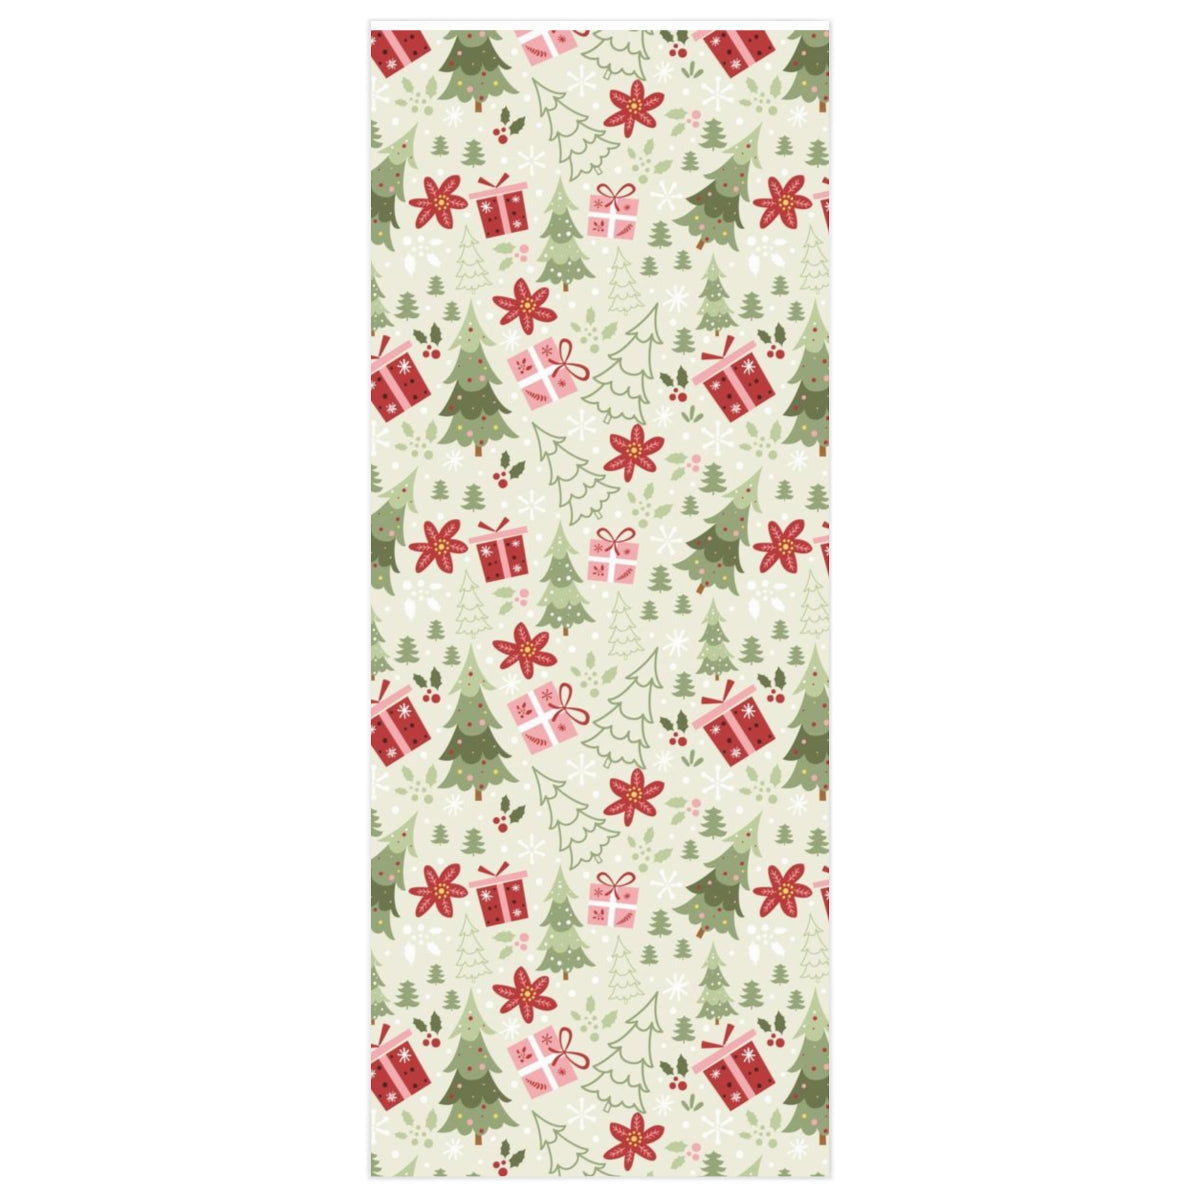 Vintage Christmas Wrapping Paper, Green Pine Trees Print Art Holiday Gift Wrap Decorative Vintage Xmas Wrapper Roll Starcove Fashion